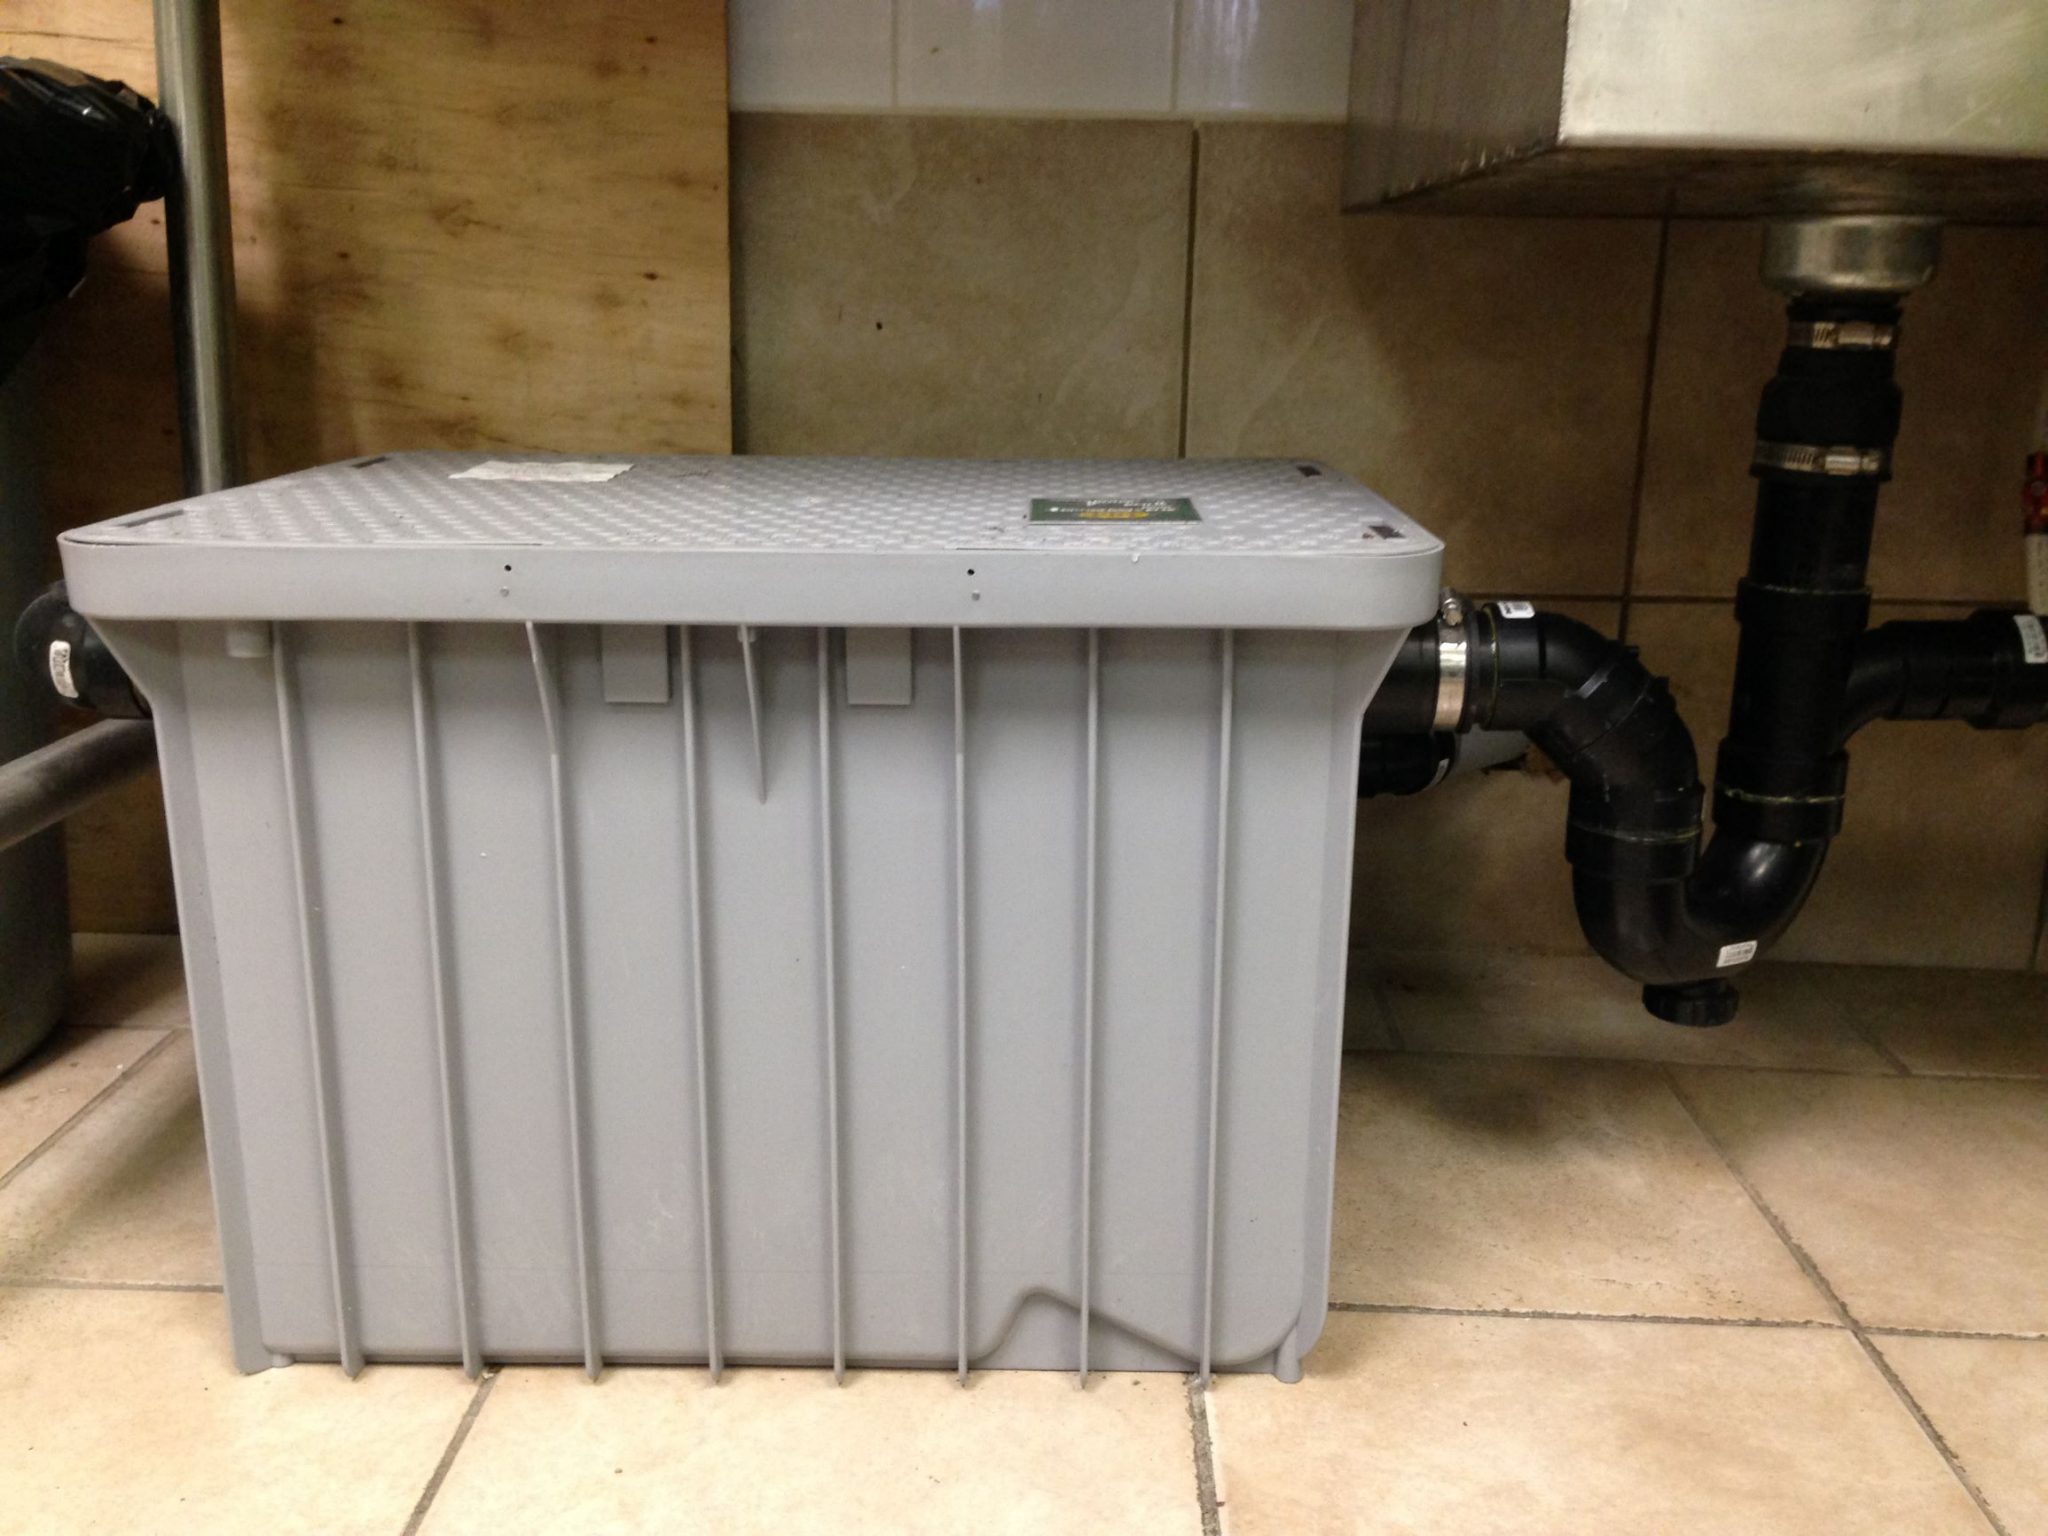 An example of a grease interceptor (grease trap)